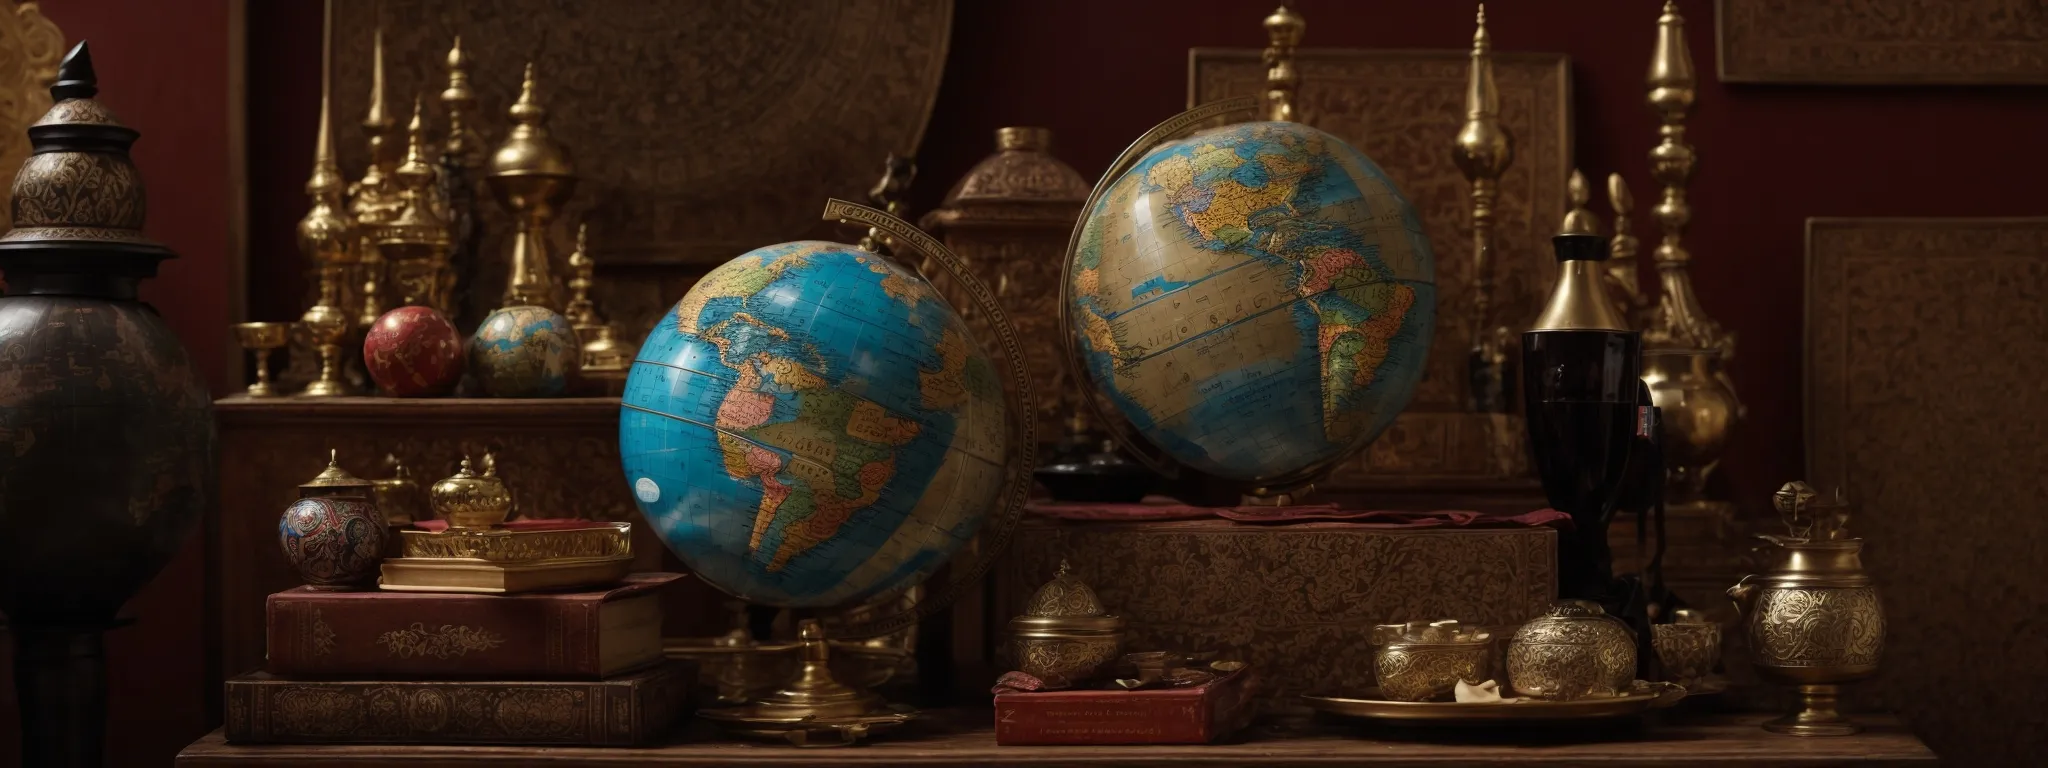 a globe surrounded by various traditional items from different cultures signifies the diversity of international audiences relevant for website optimization.